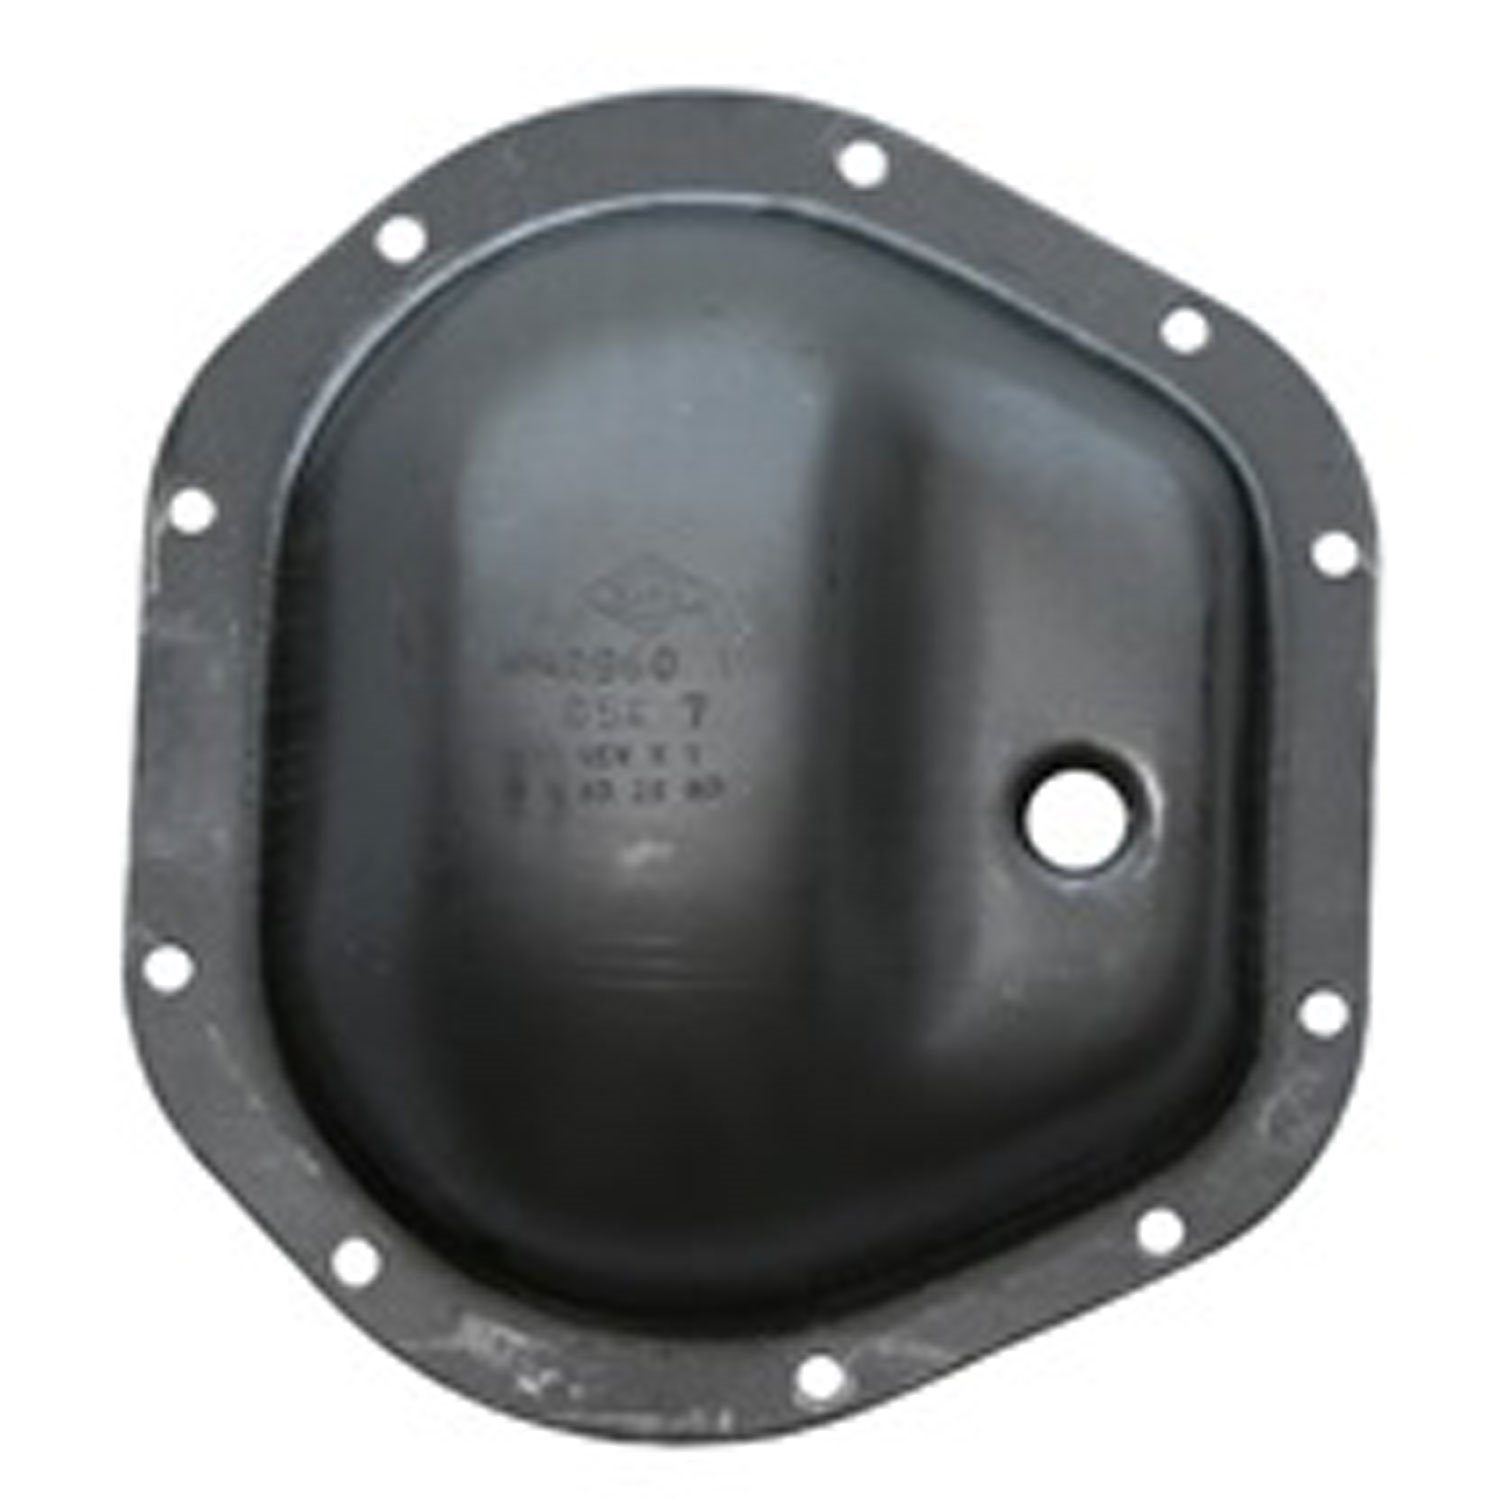 This stock steel differential cover from Omix-ADA fits the Dana 44 rear axle.